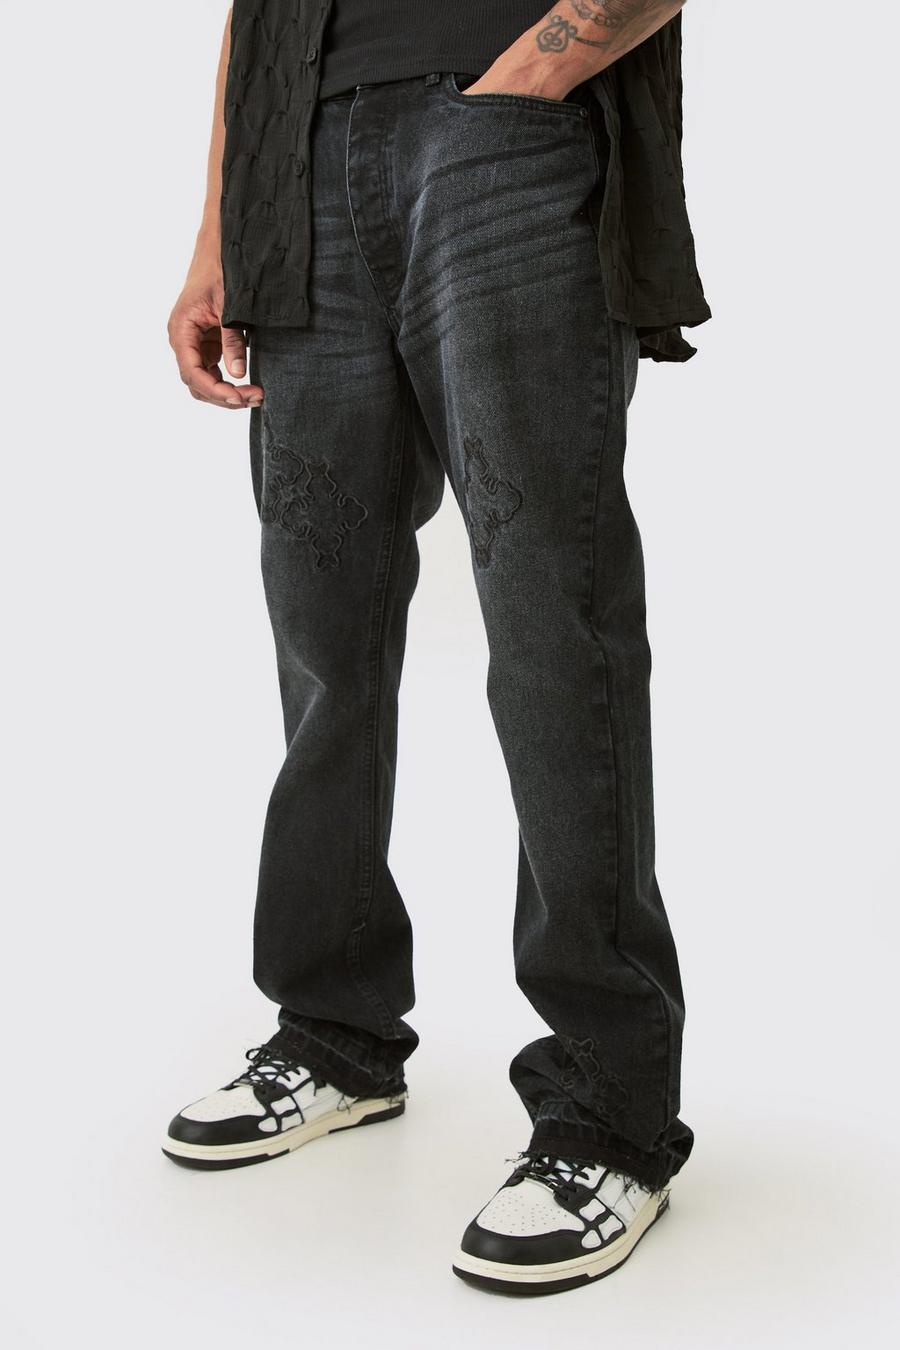 Jeans Tall Slim Fit in denim rigido con applique a croce, Washed black image number 1